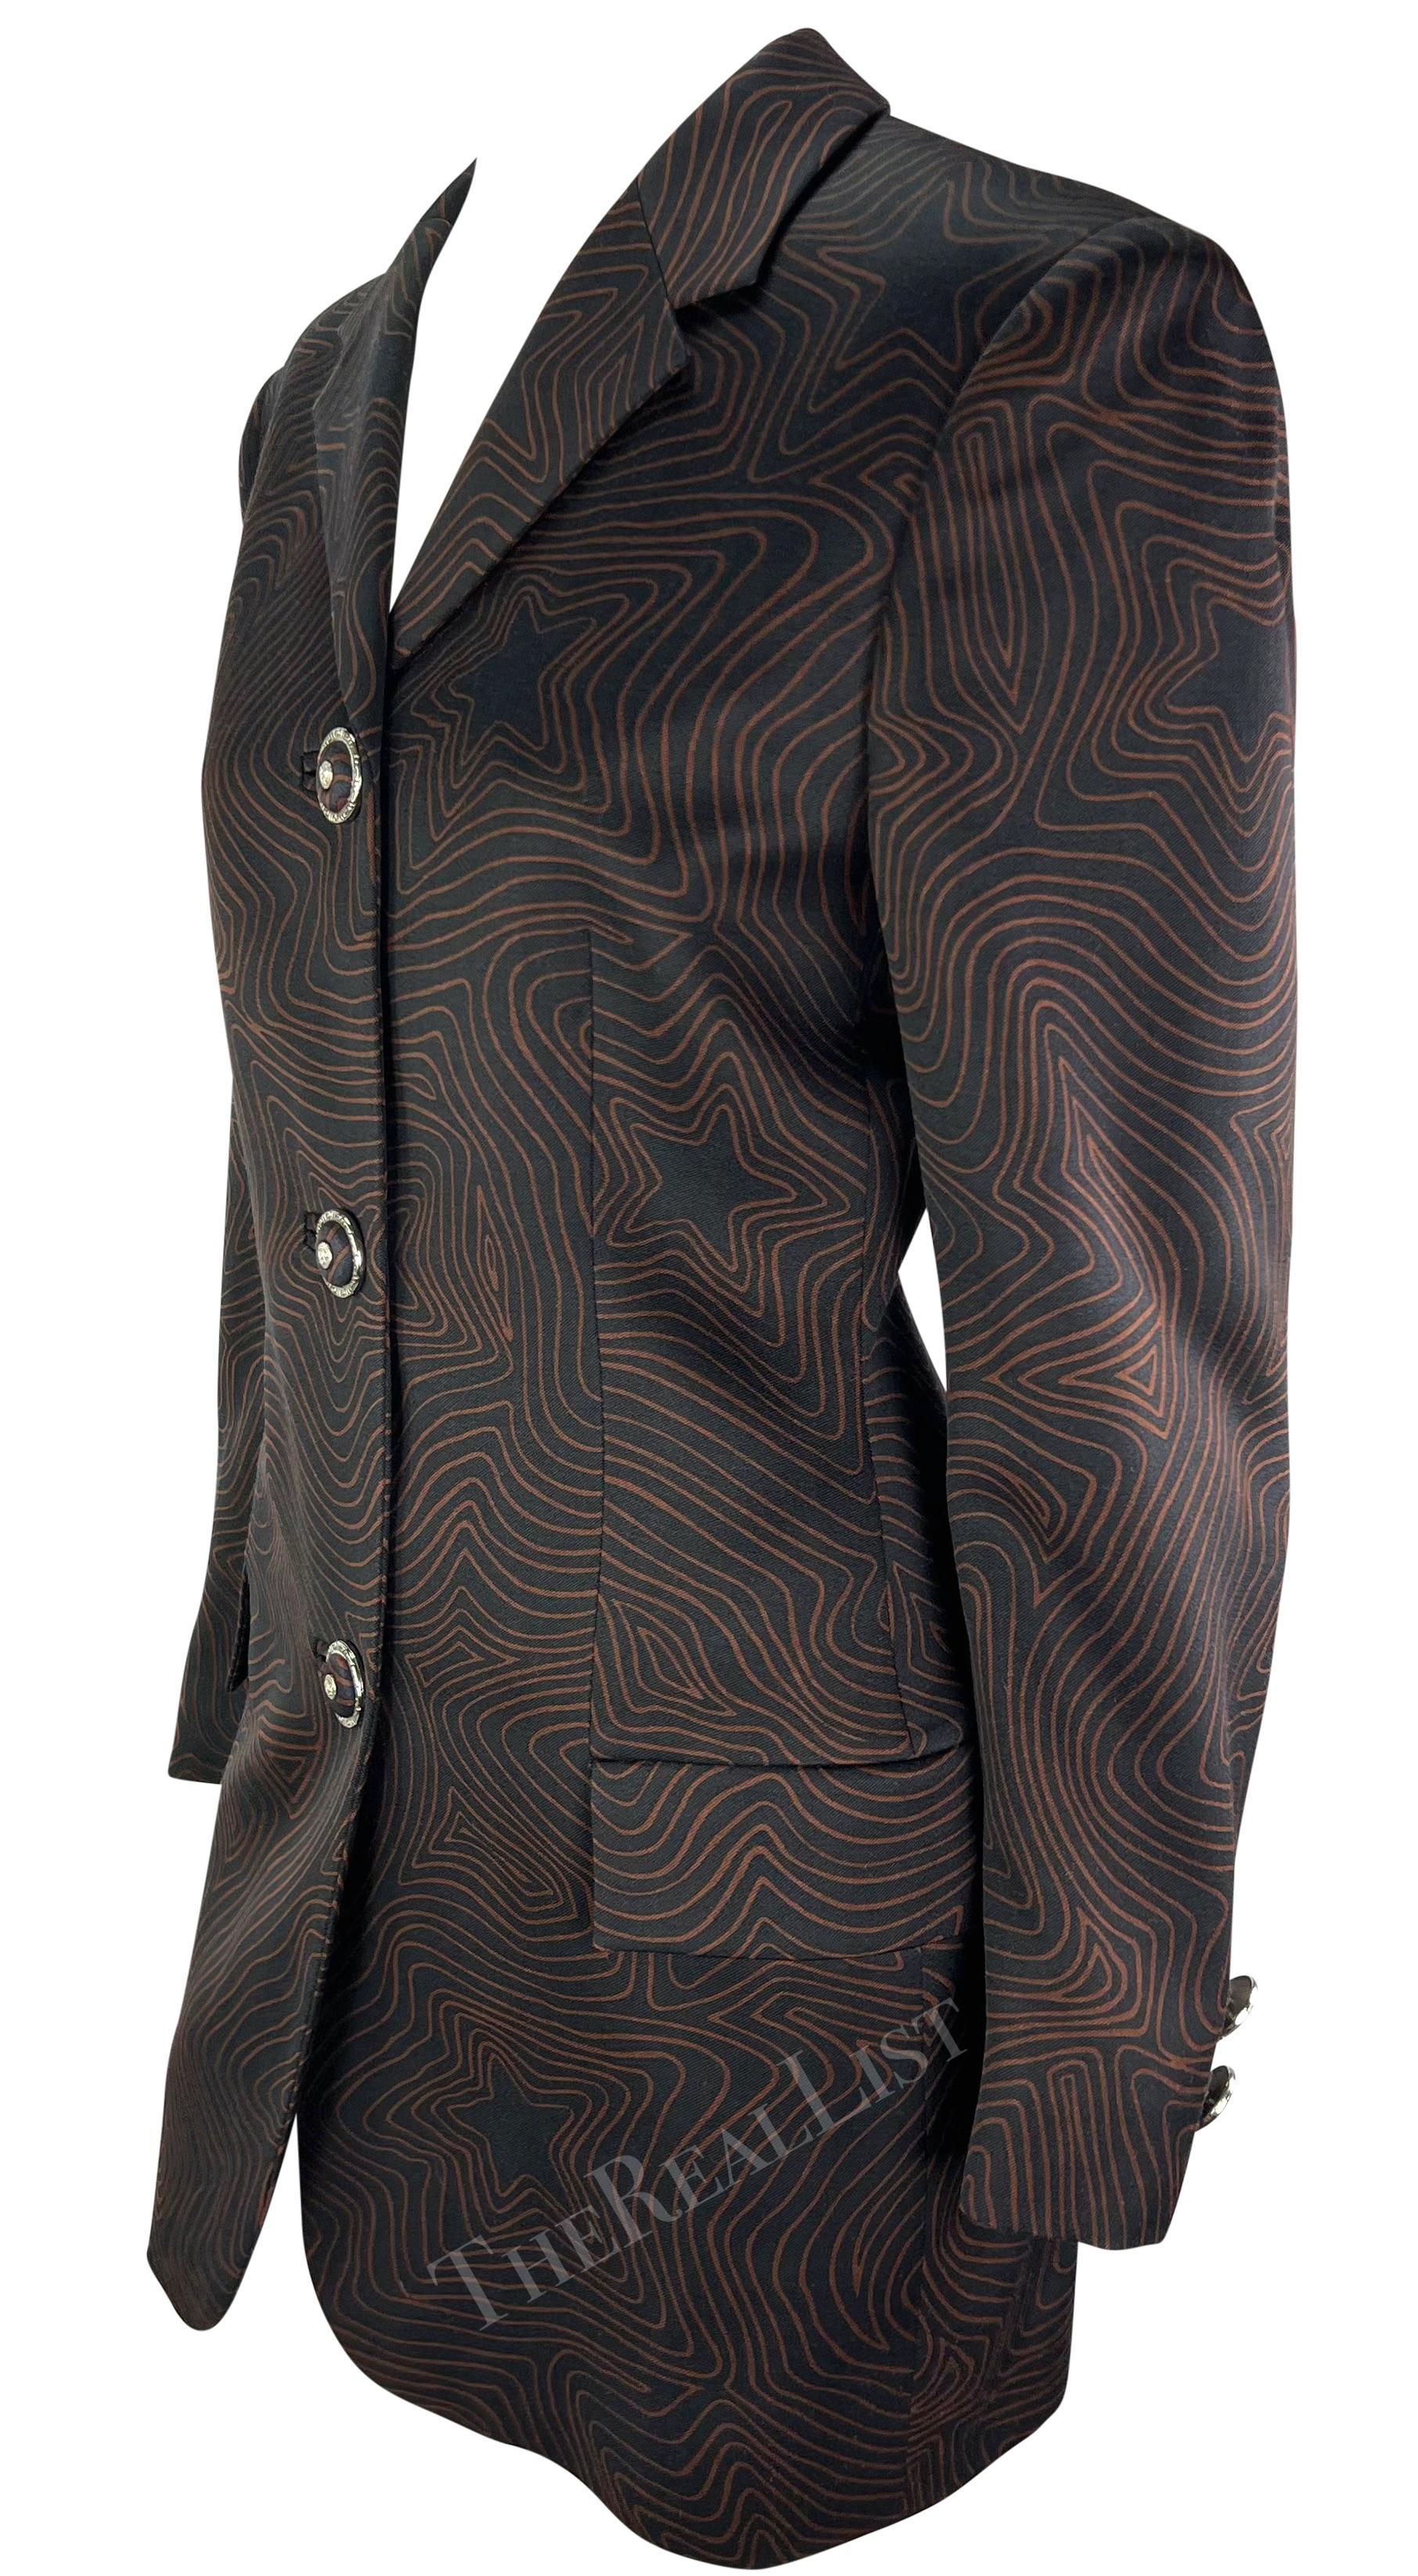 Women's S/S 1996 Gianni Versace Black Brown Abstract Star Print Blazer For Sale